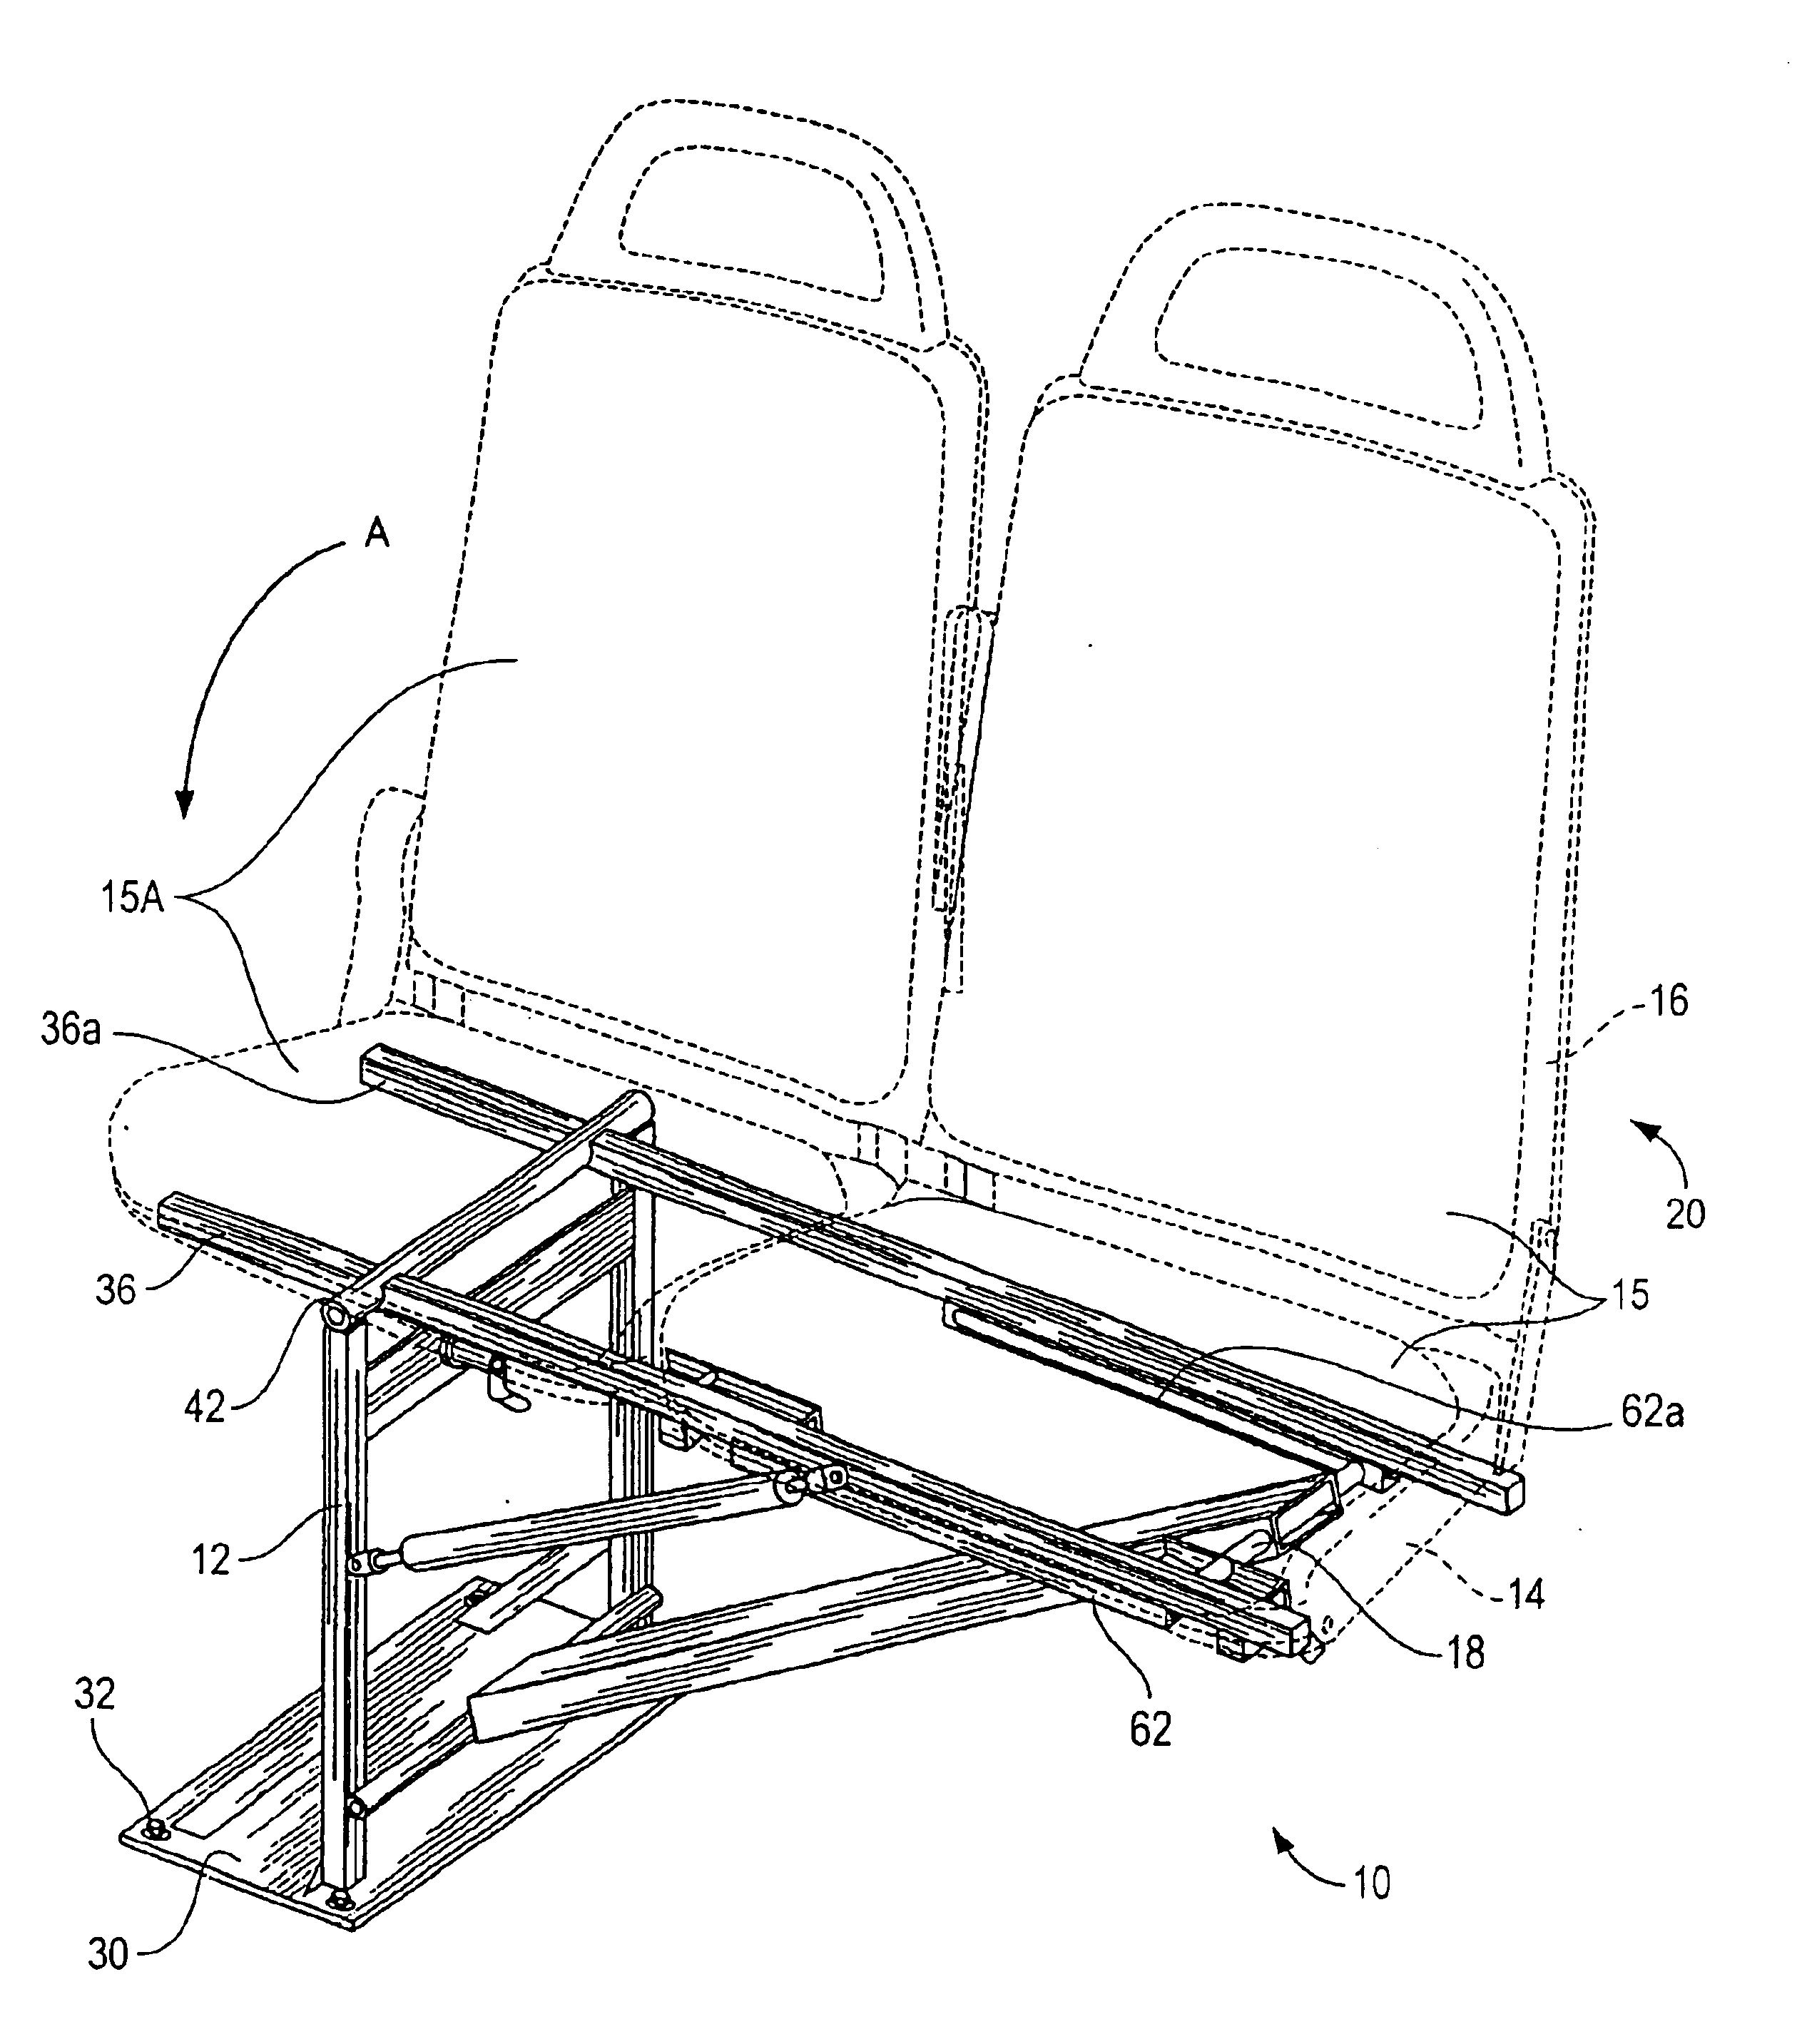 Stowable seat with reduced vibration and improved locking mechanisms